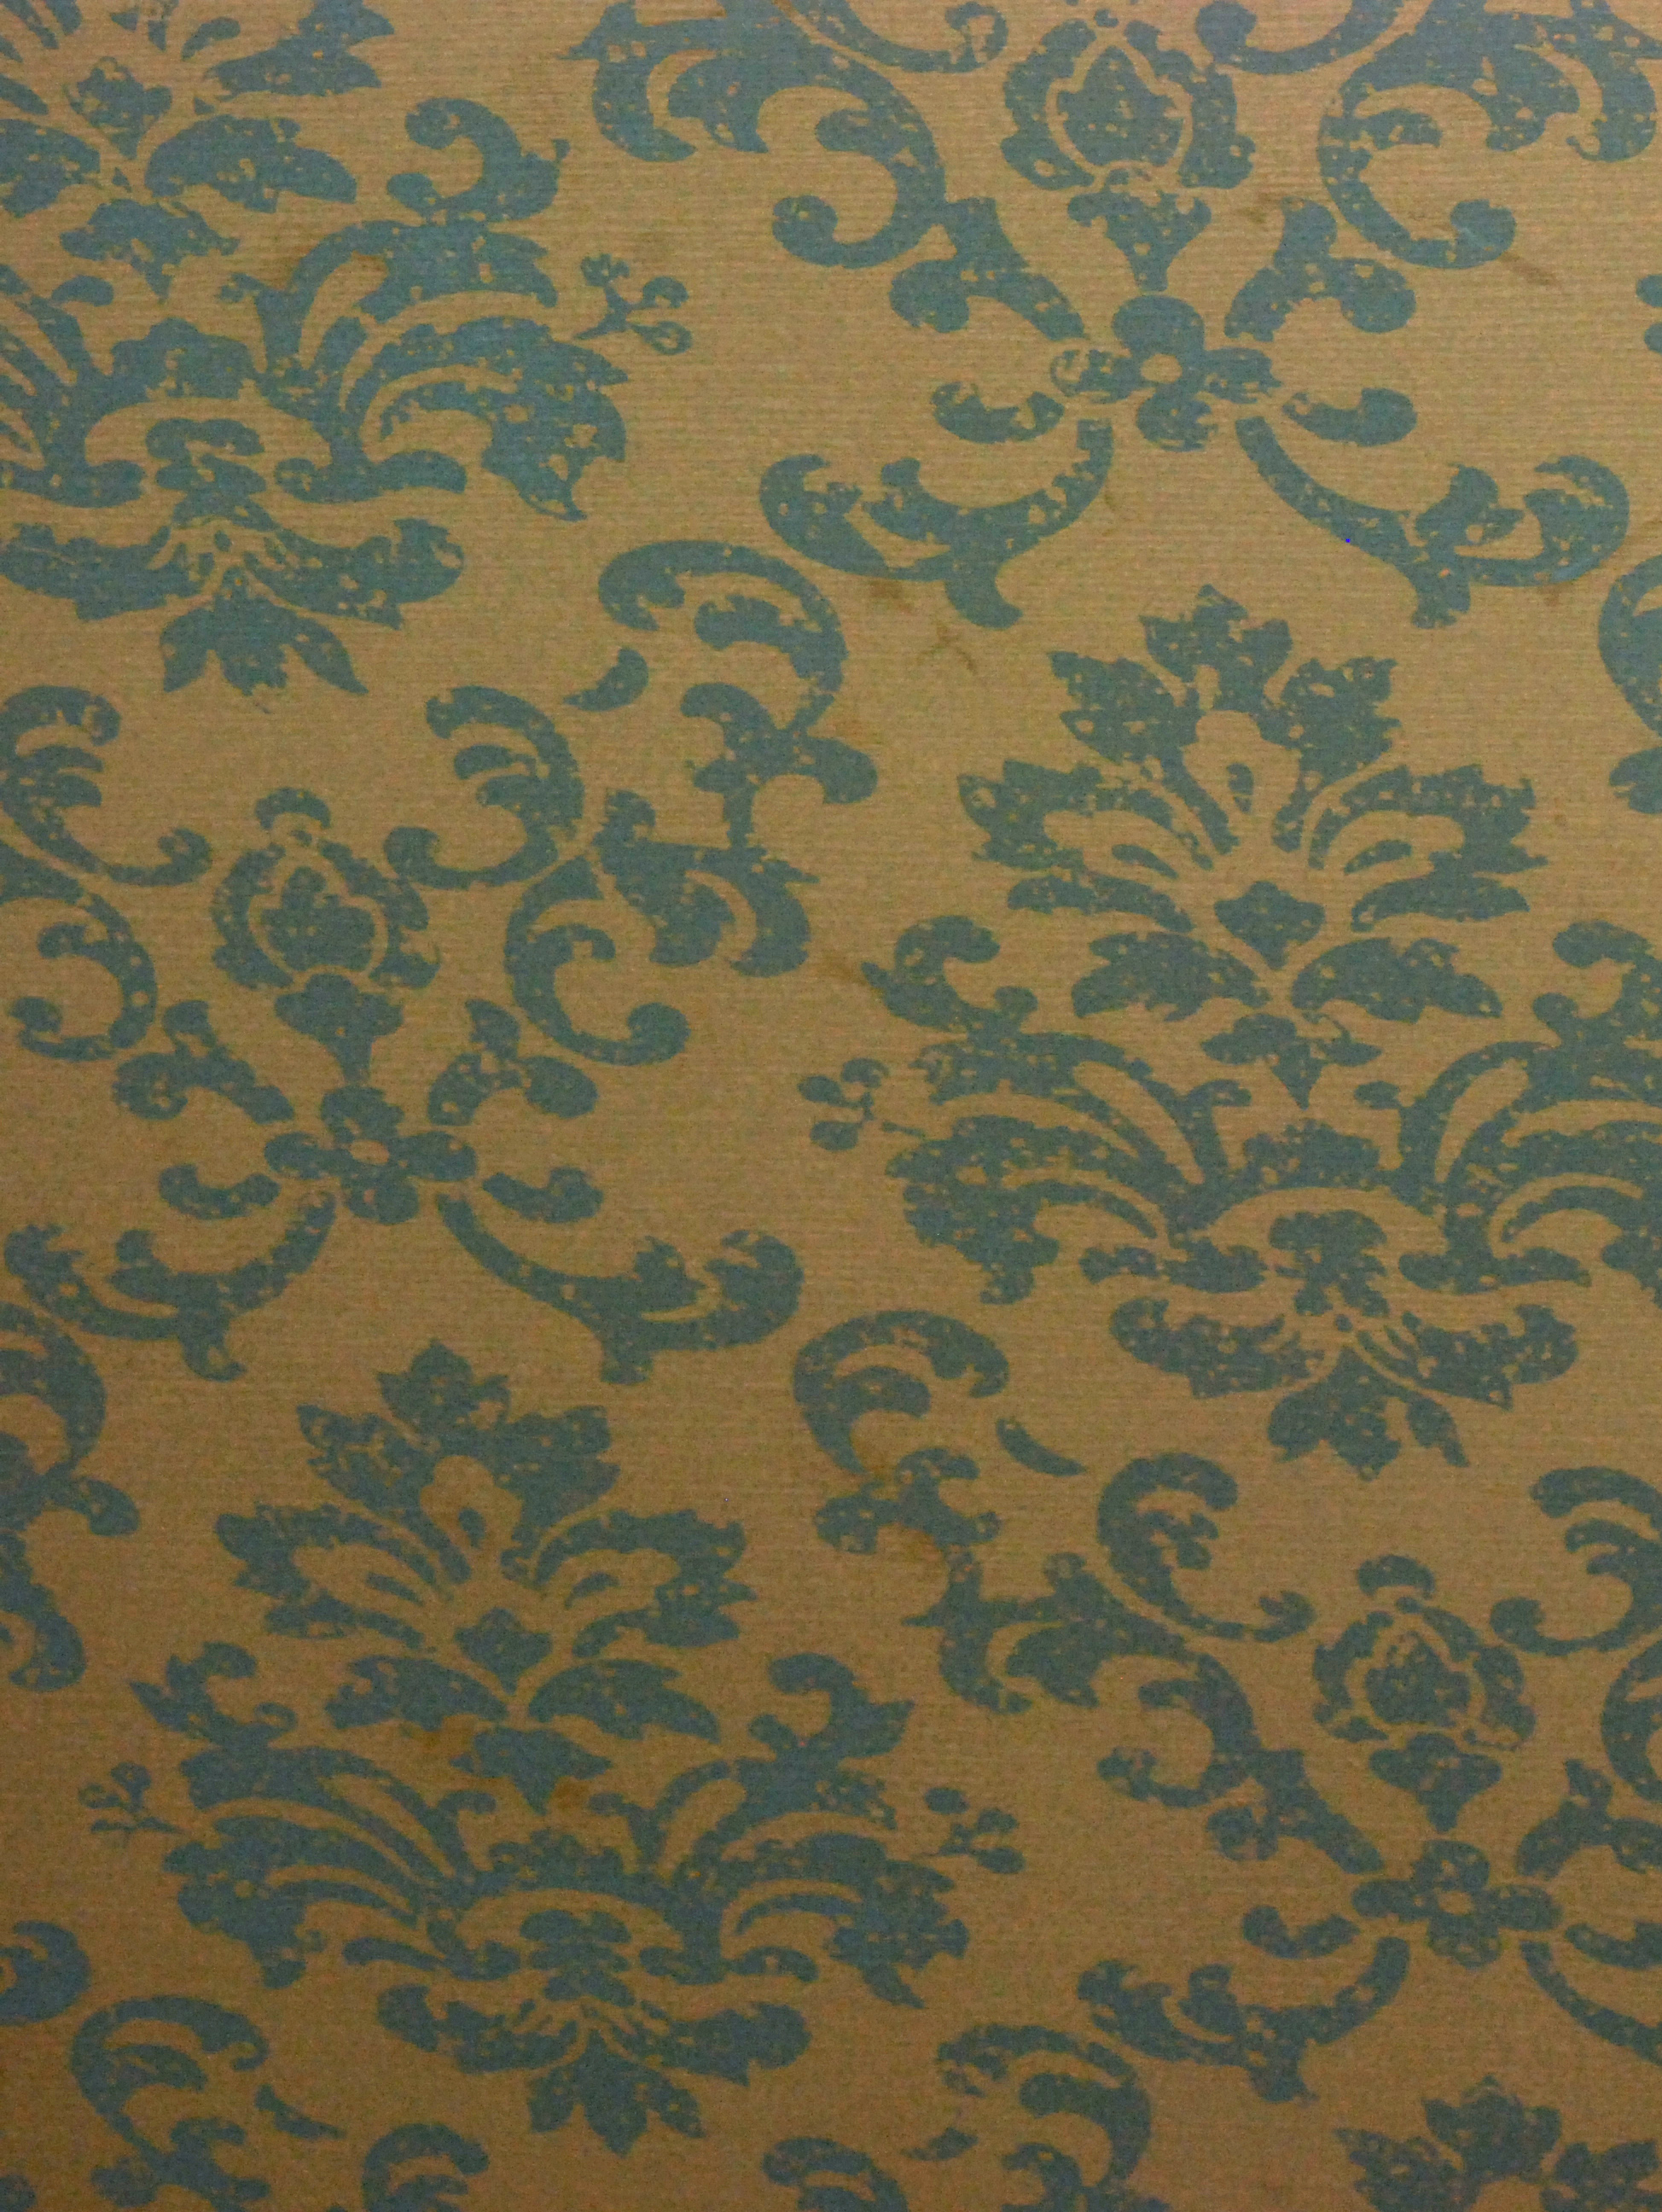 Old Wallpapers Patterns - Wallpaper Zone